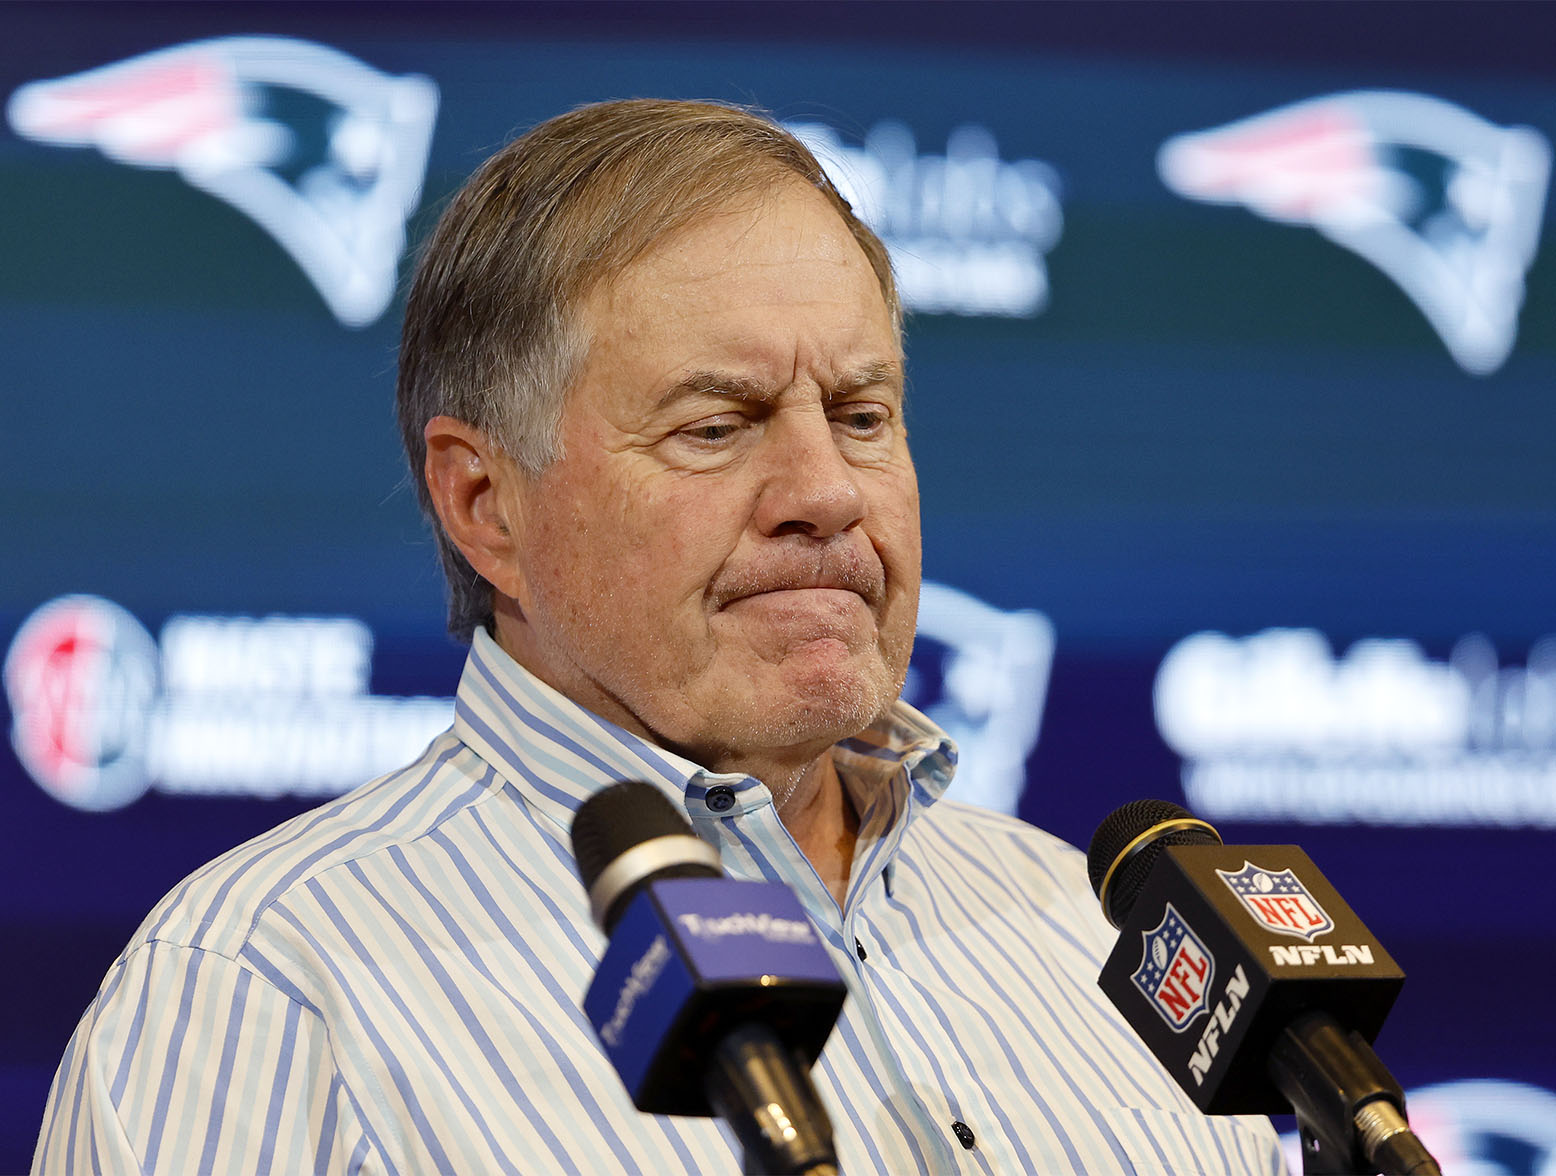 FOXBOROUGH, MASSACHUSETTS - JANUARY 07: New England Patriots head coach Bill Belichick speaks during a press conference after a game against the New York Jets at Gillette Stadium on January 07, 2024 in Foxborough, Massachusetts. (Photo by Winslow Townson/Getty Images)